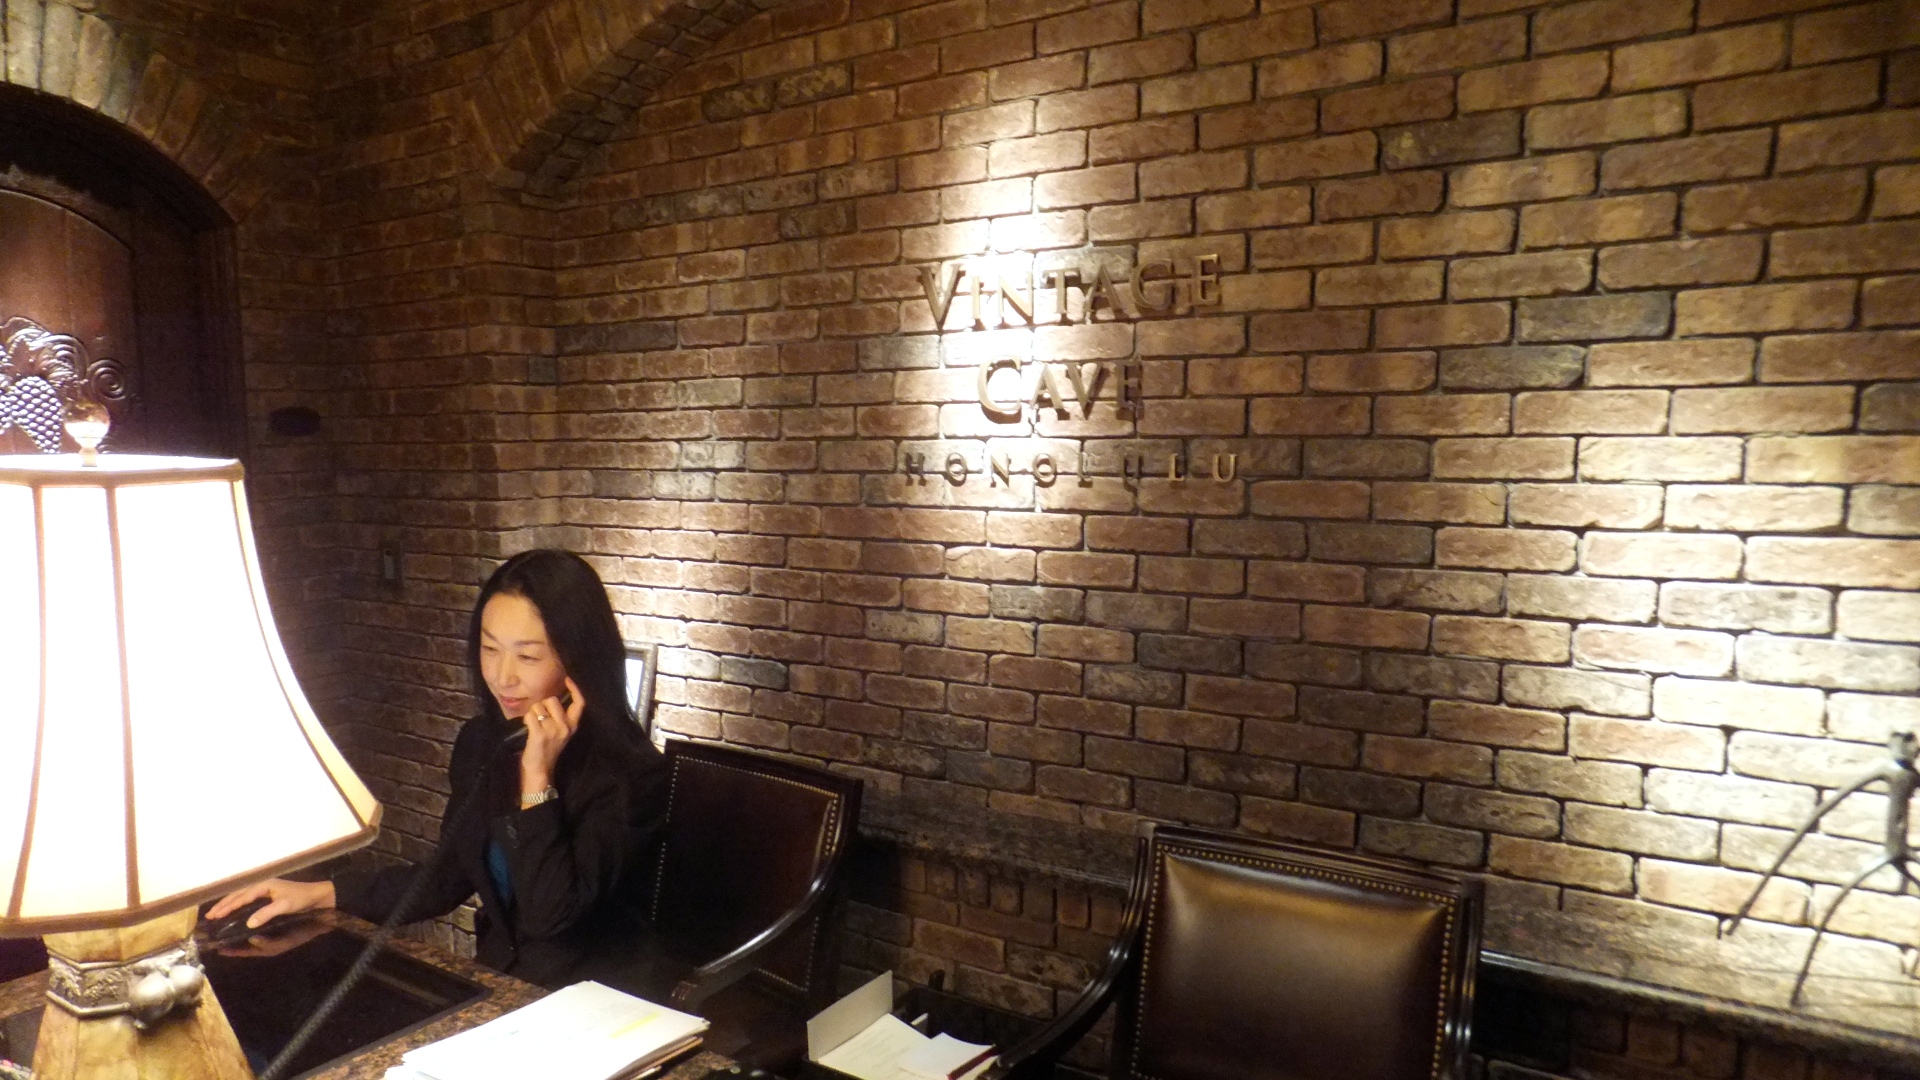 Vintage Cave is open to the public and for right now is only accepting reservations dinner.